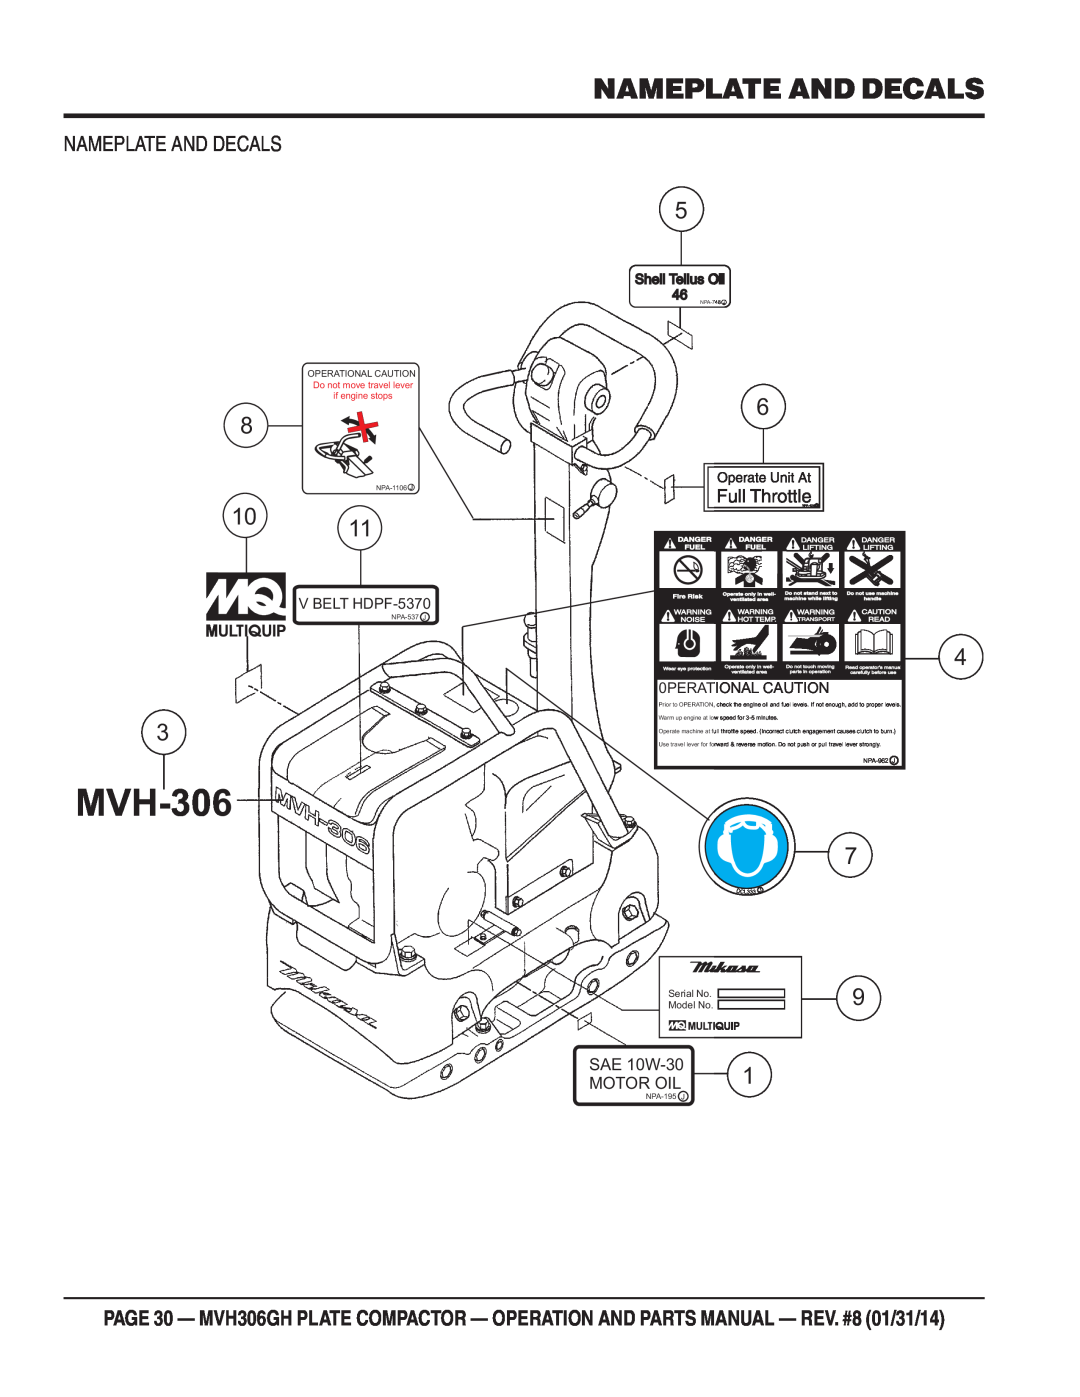 Multiquip MVH306GH Nameplate And Decals, MVH-306, SAE 10W-30, Motor Oil, Shell Tellus Oil, V BELT HDPF-5370, Serial No 